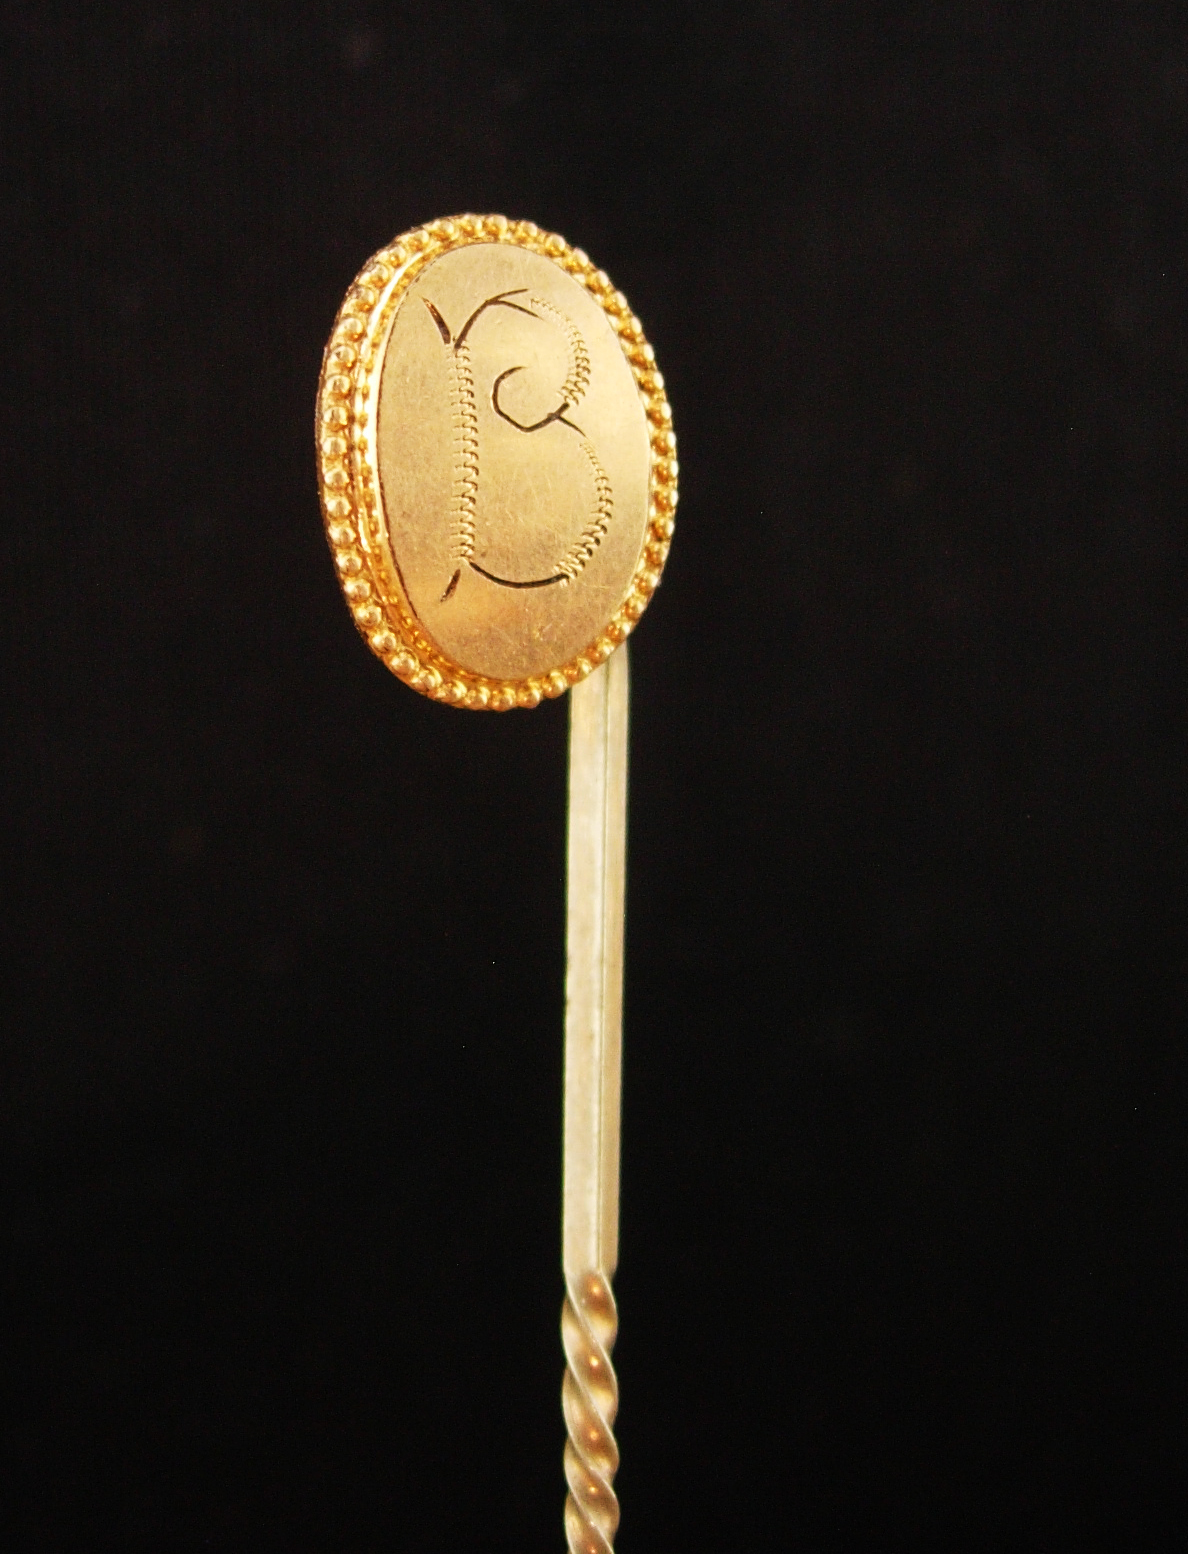 Primary image for Antique Stickpin / Letter B victorian lapel pin / vintage mens wedding jewelry /